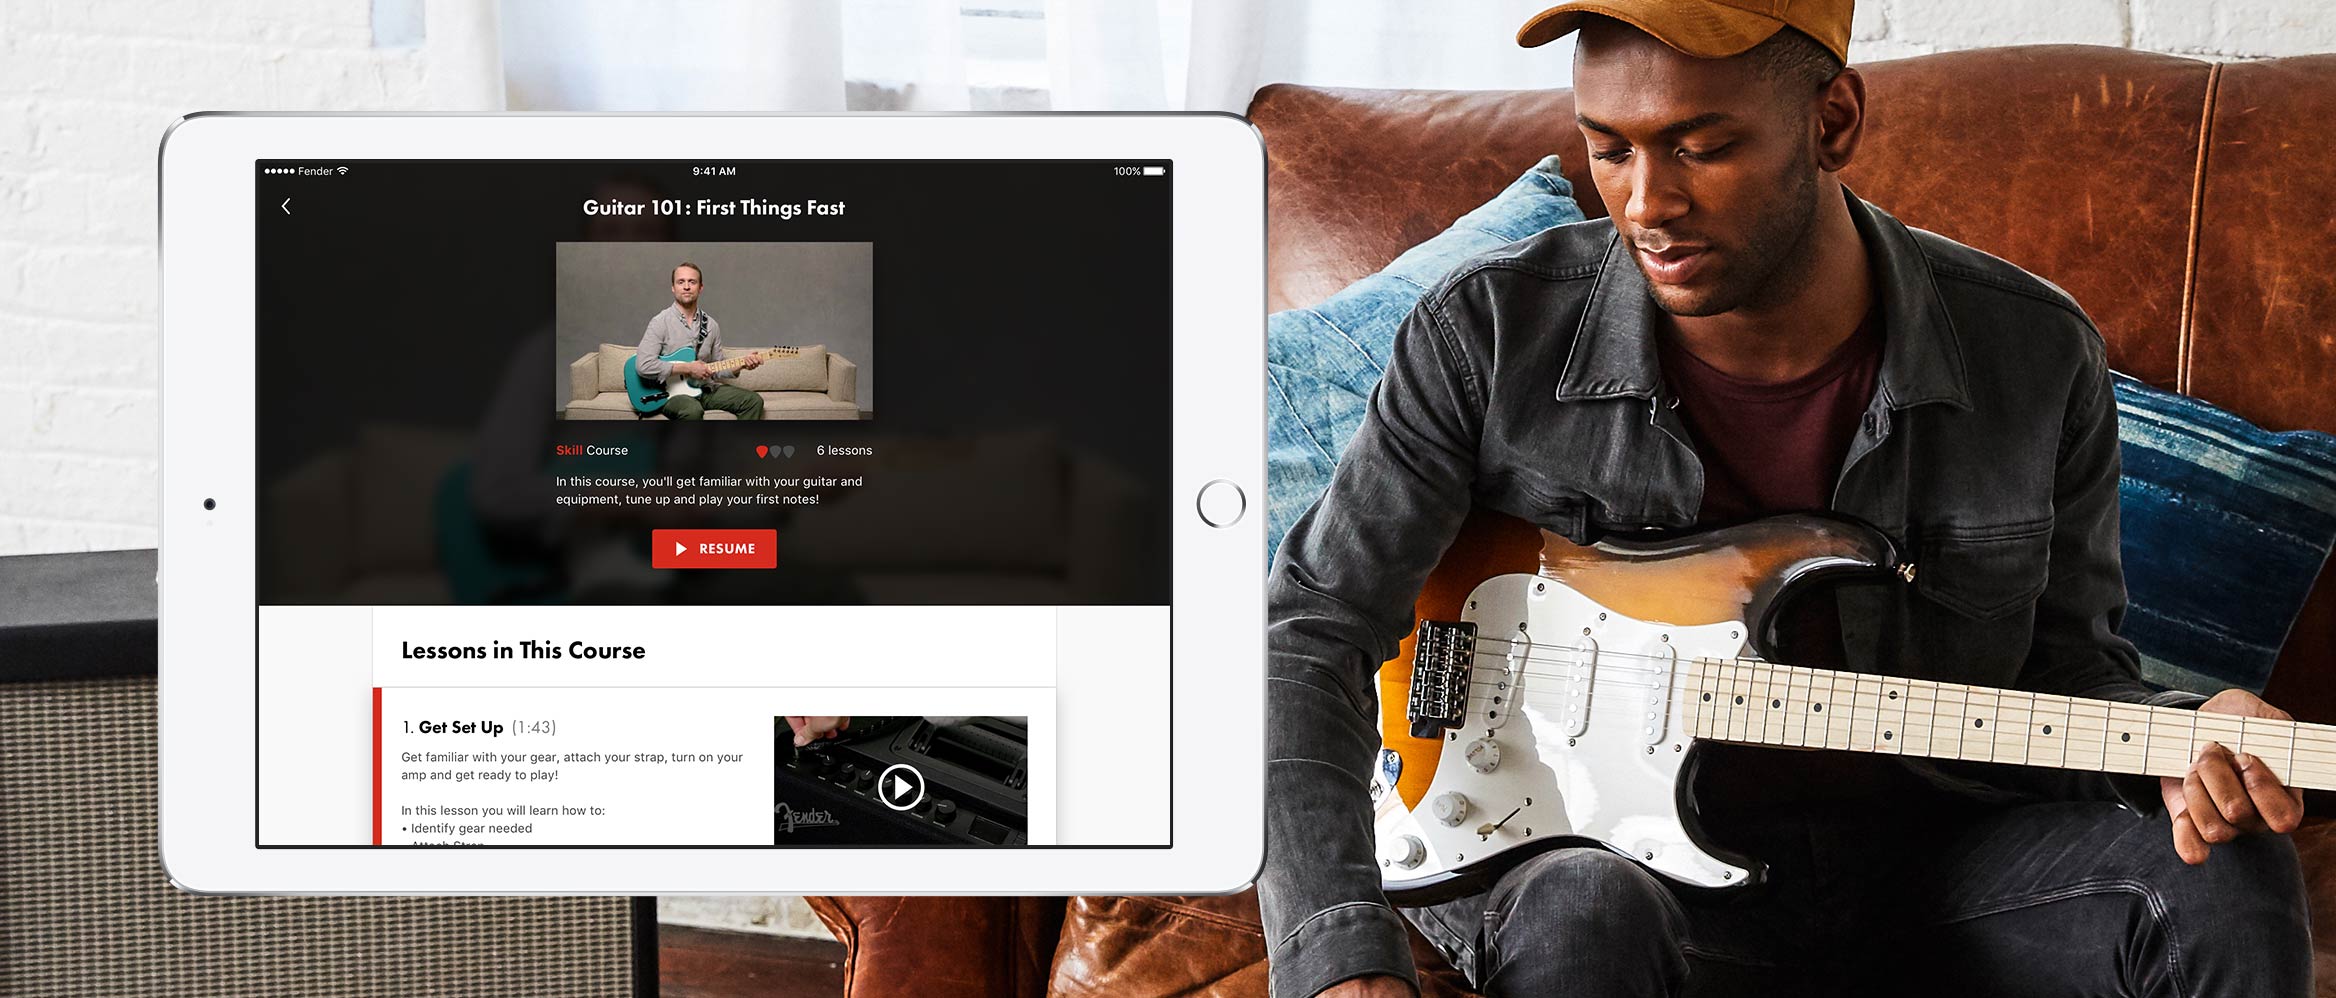 Fender Play Comes To Android And Ipad To Teach Guitar